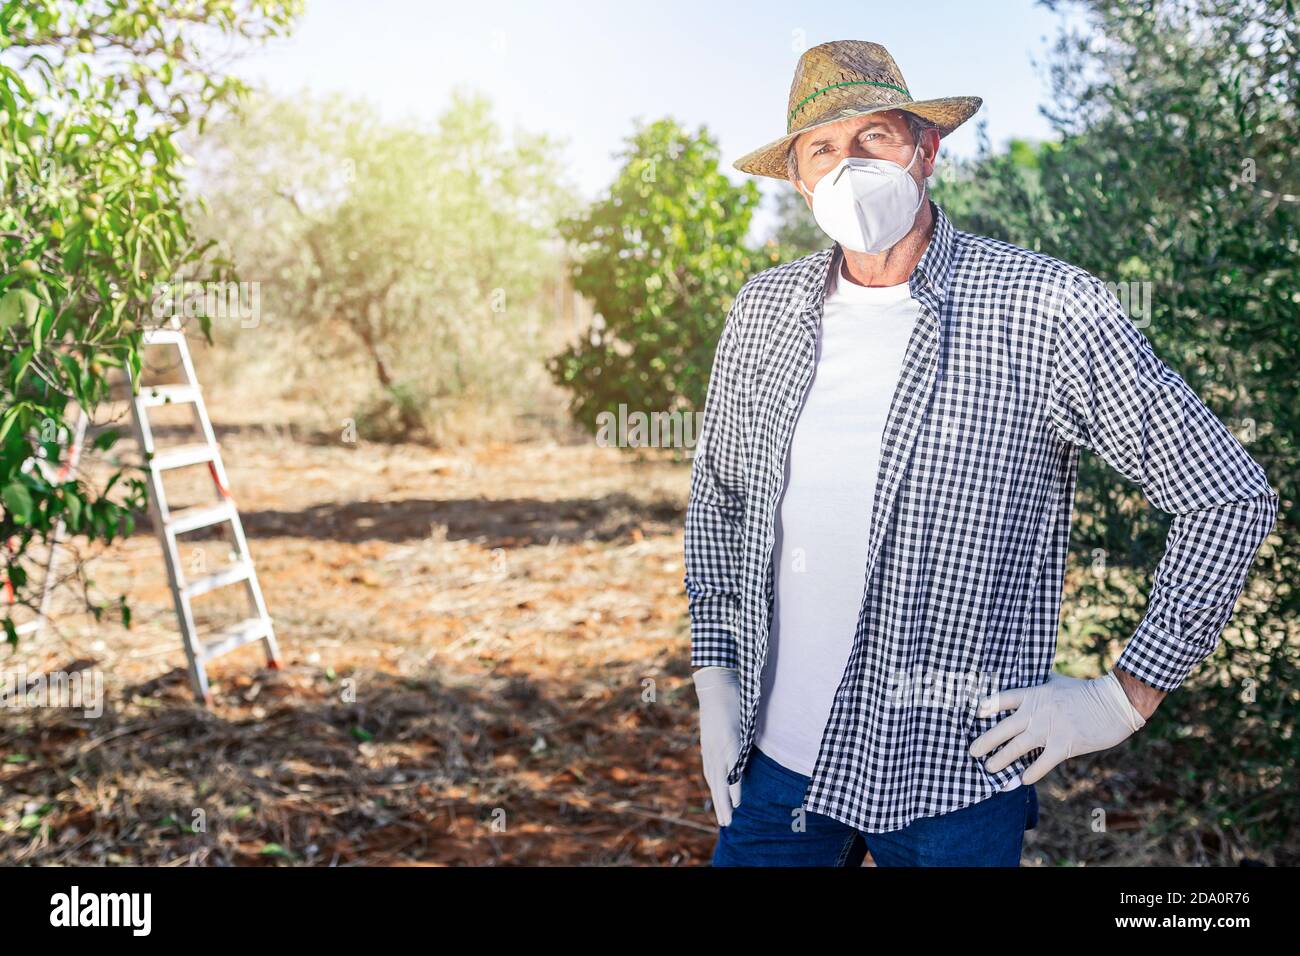 Mature male gardener in gloves standing with hand on waist in garden with green fruit plants Stock Photo